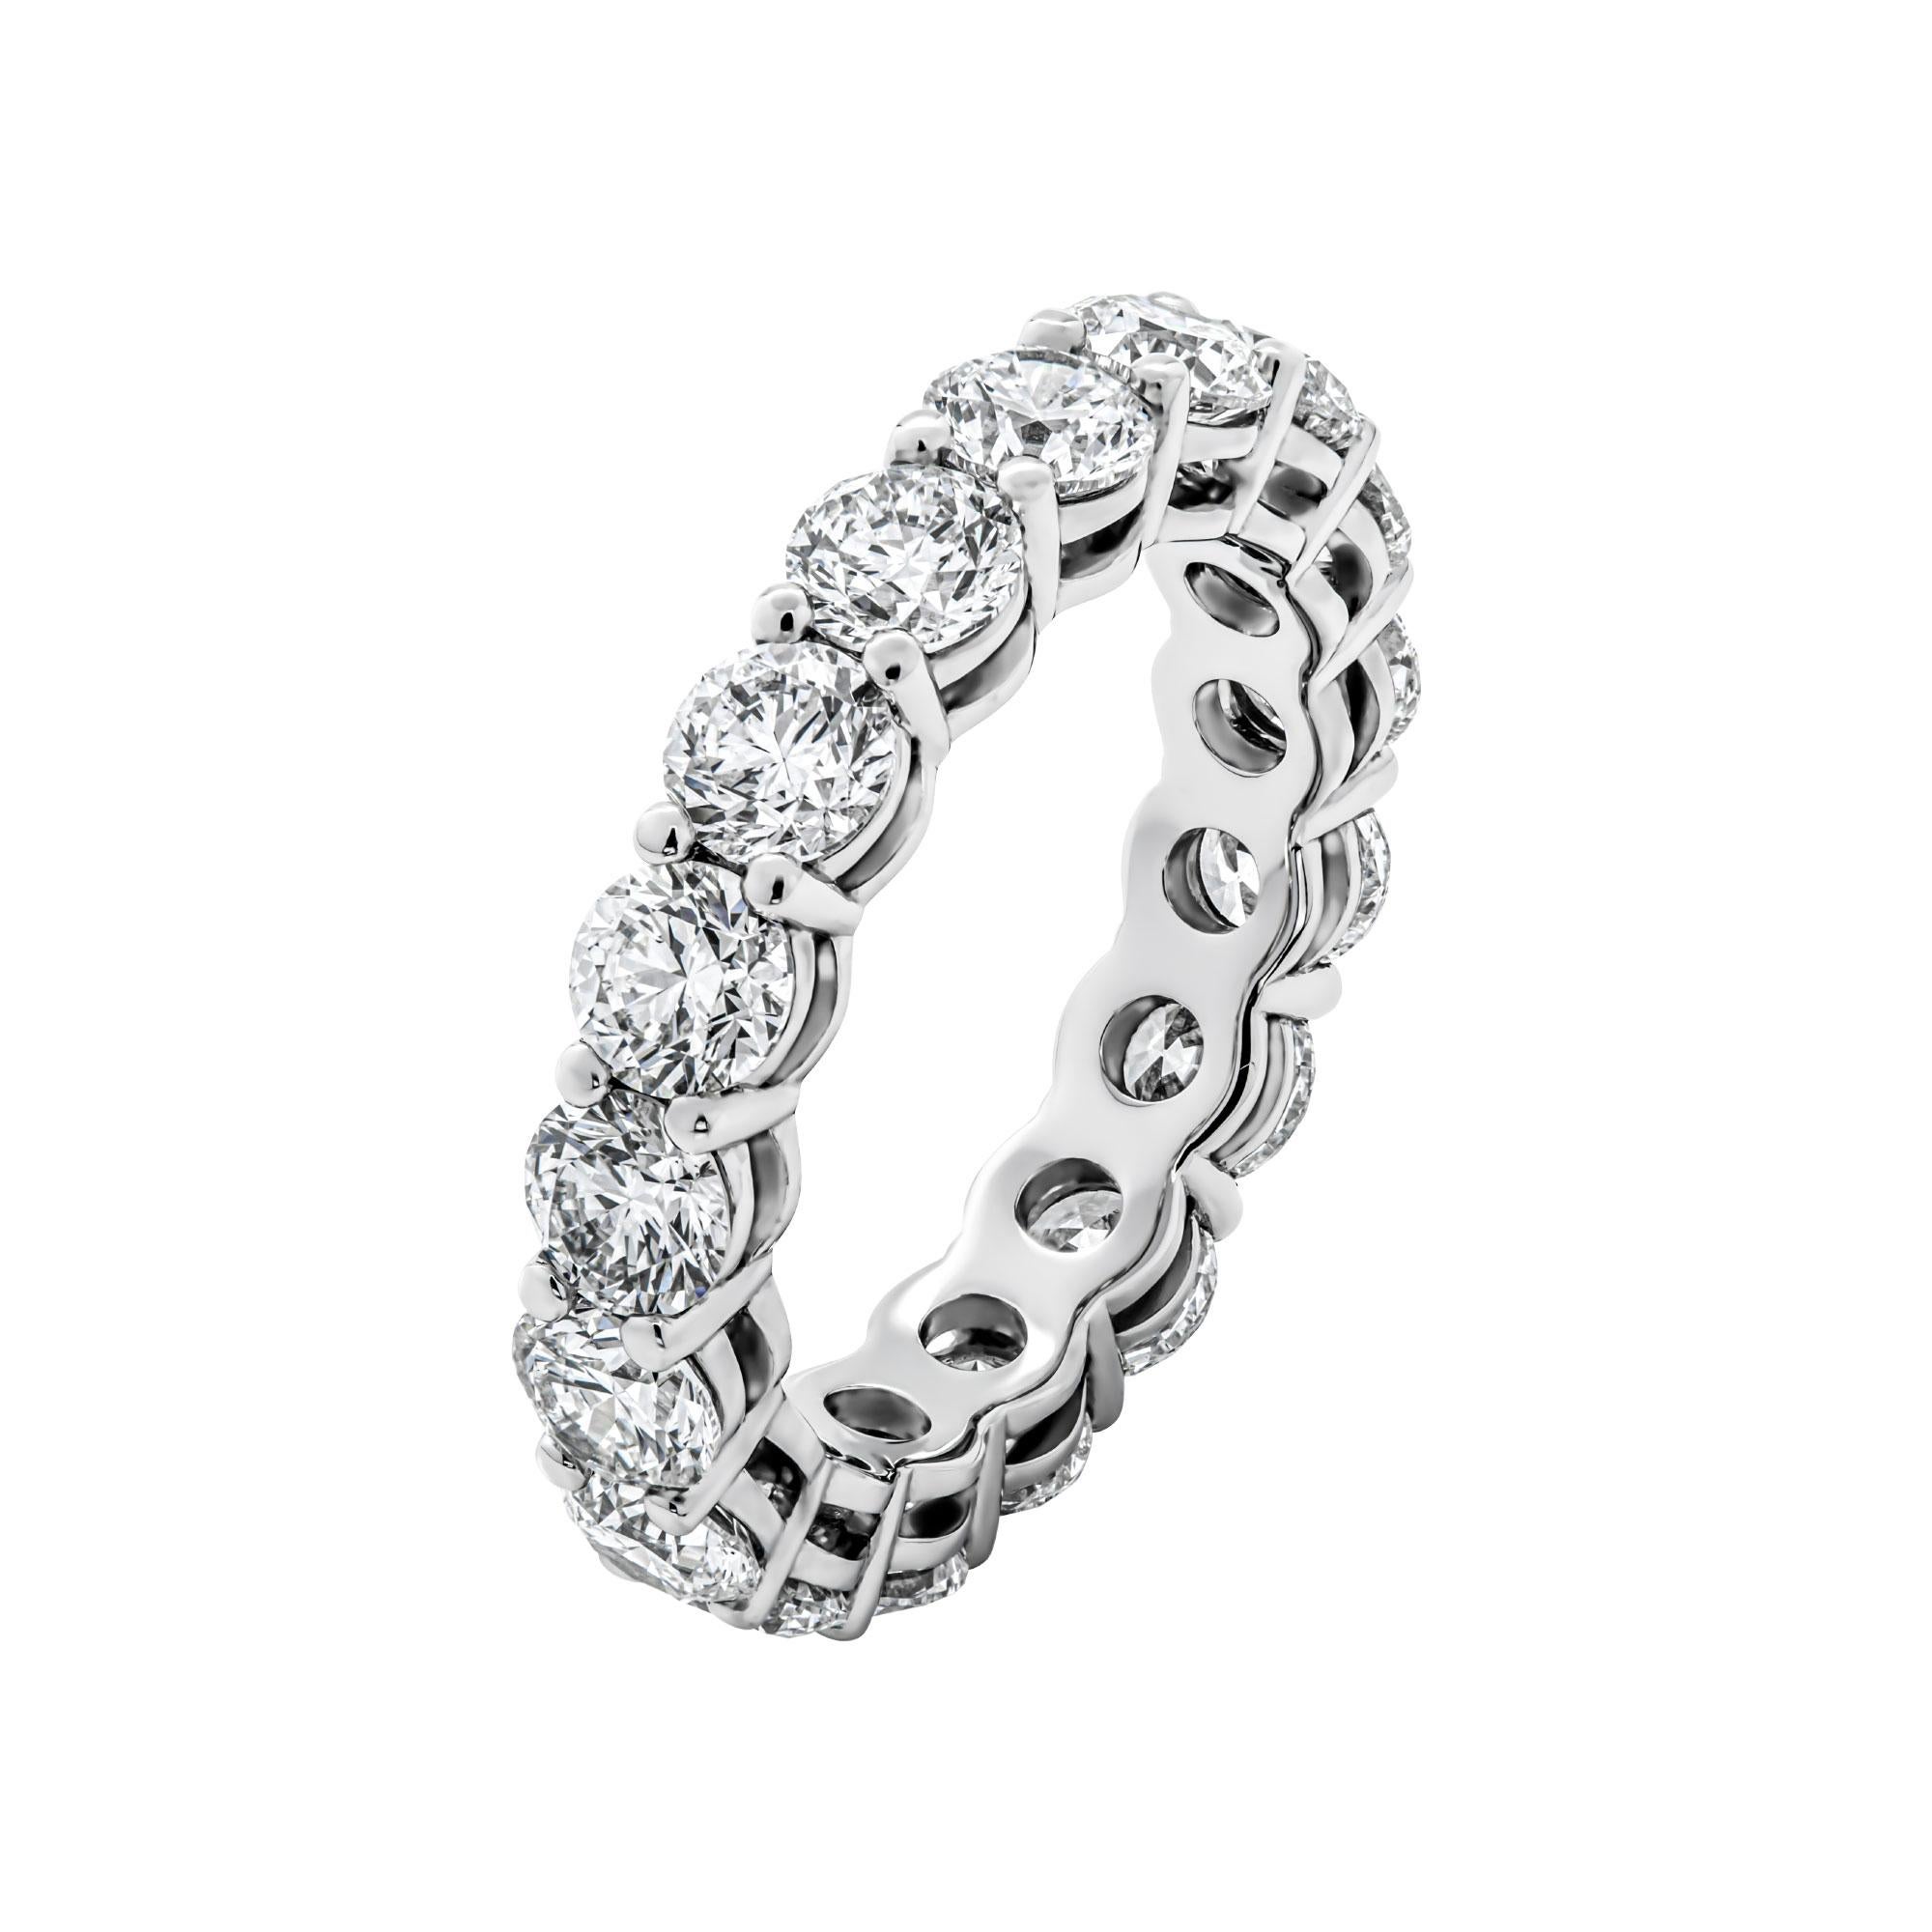 Eternity band with 3.77 Carat Round Cut Diamonds
Mounted in Platinum 950, 17 Round diamonds won't miss a sparkle! - most wanted shape of the stone fore anniversary band
Beautiful cut, bold and classy, can be worn as a wedding band next to your